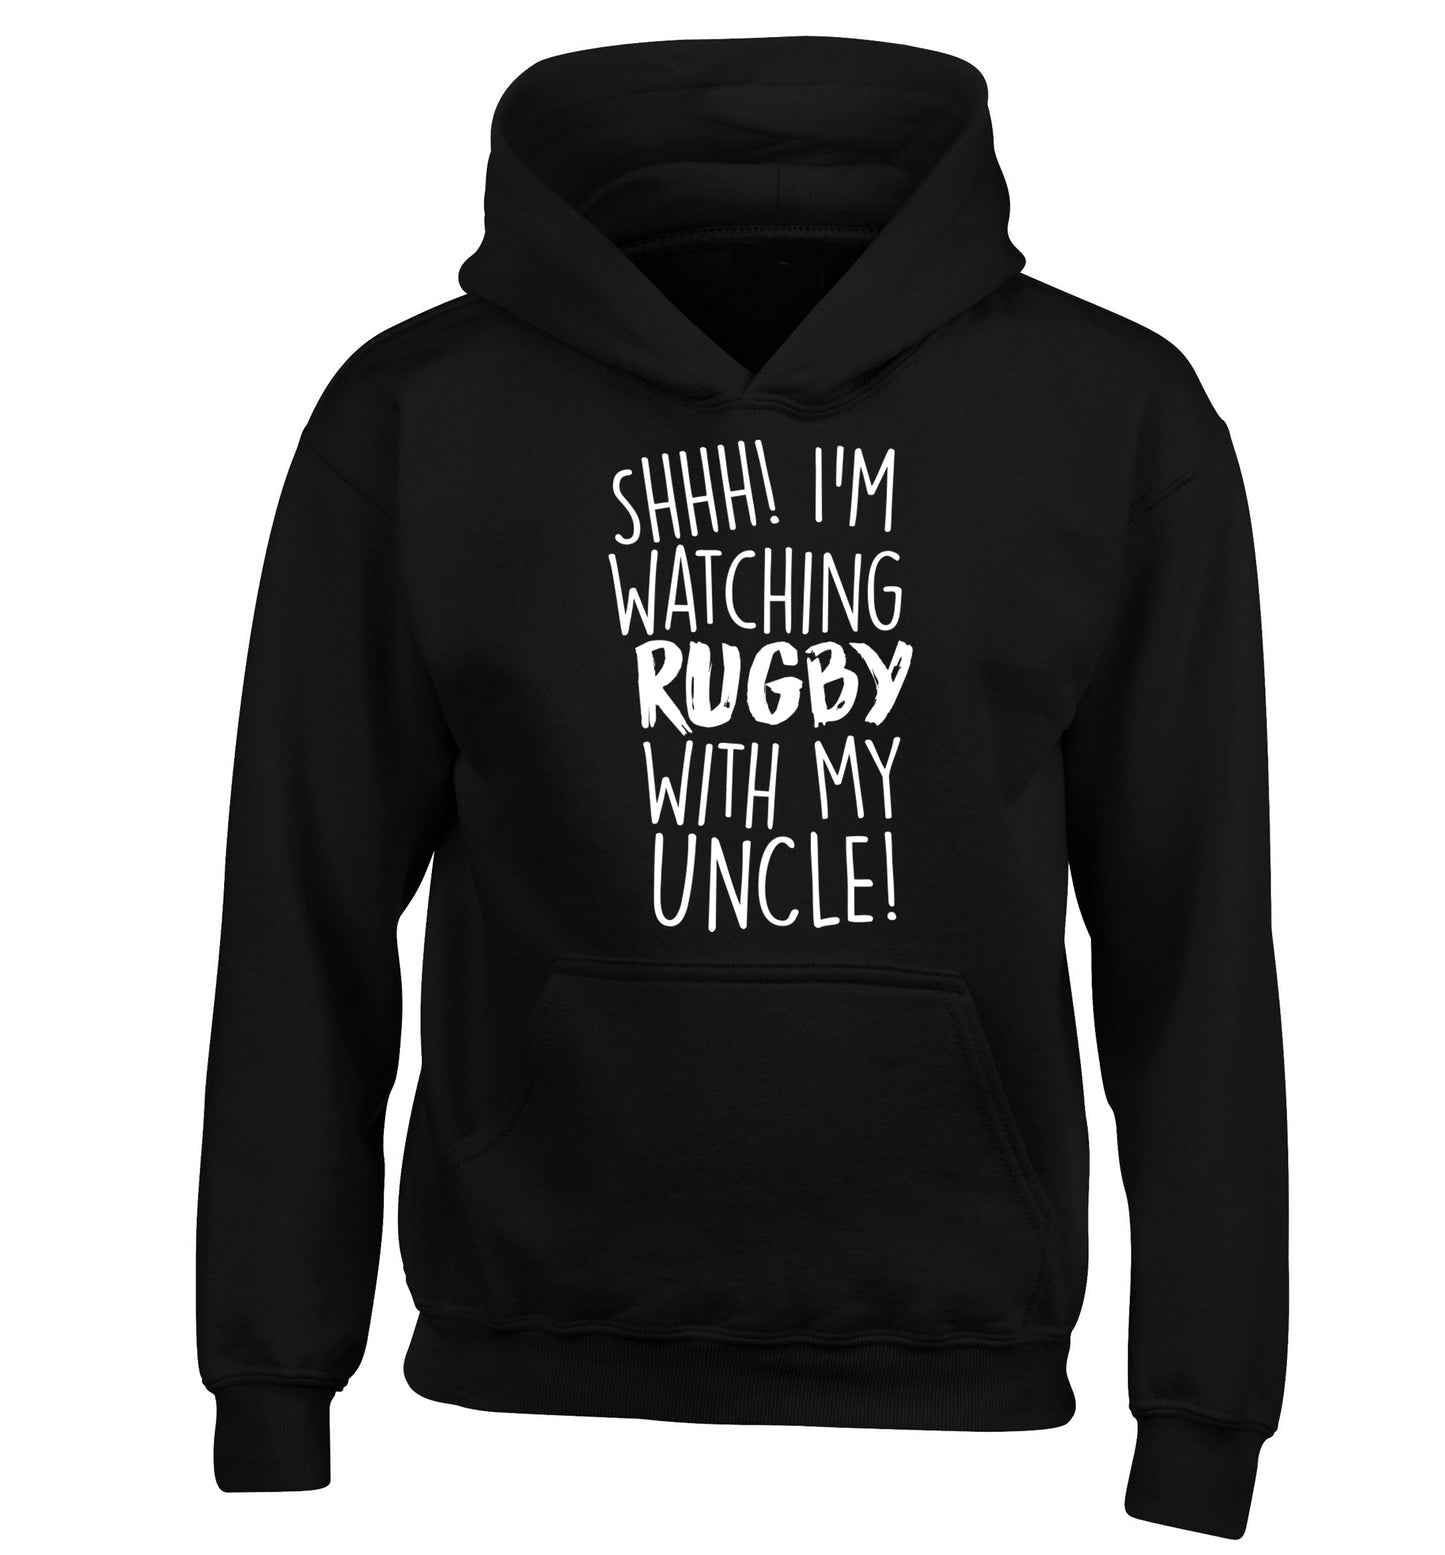 Shh.. I'm watching rugby with my uncle children's black hoodie 12-13 Years